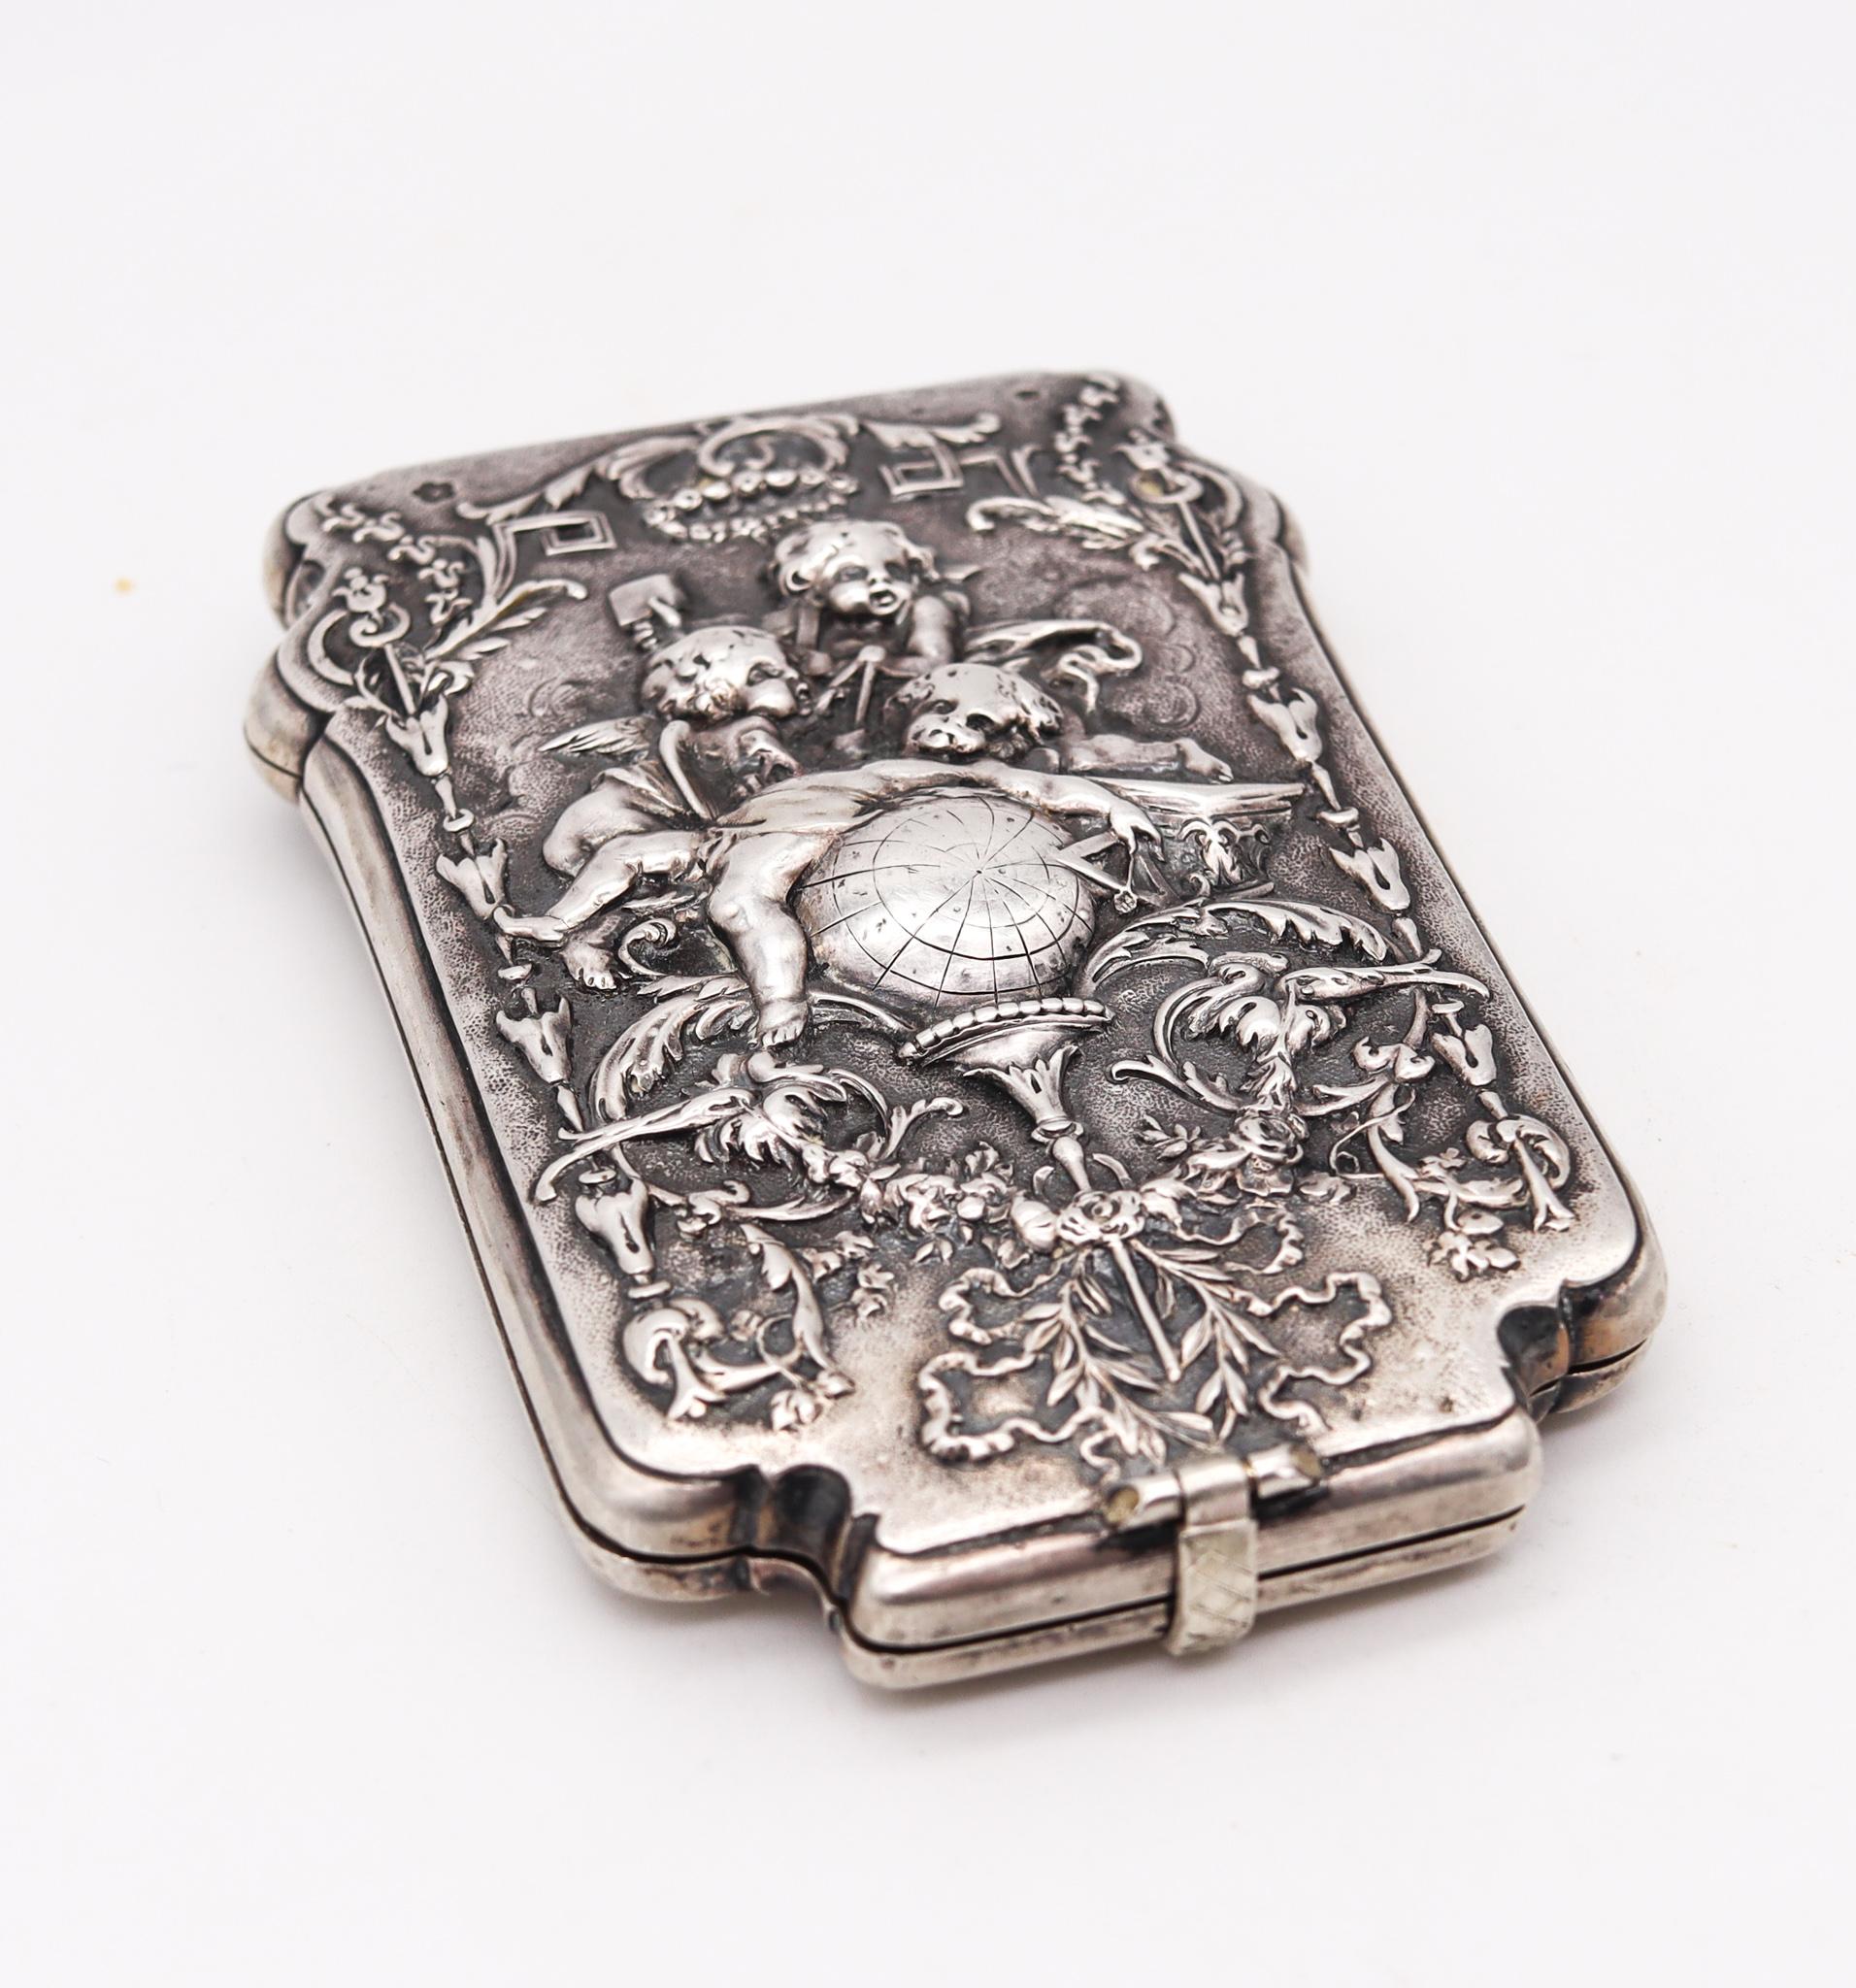 Art nouveau belle epoque card holder created by Brüder Figdor.

An impressive and beautiful piece, created in Vienna Austria by Brüder Figdor during the Edwardian and Belle Epoque periods, back in the 1905. This card holder case was crafted with